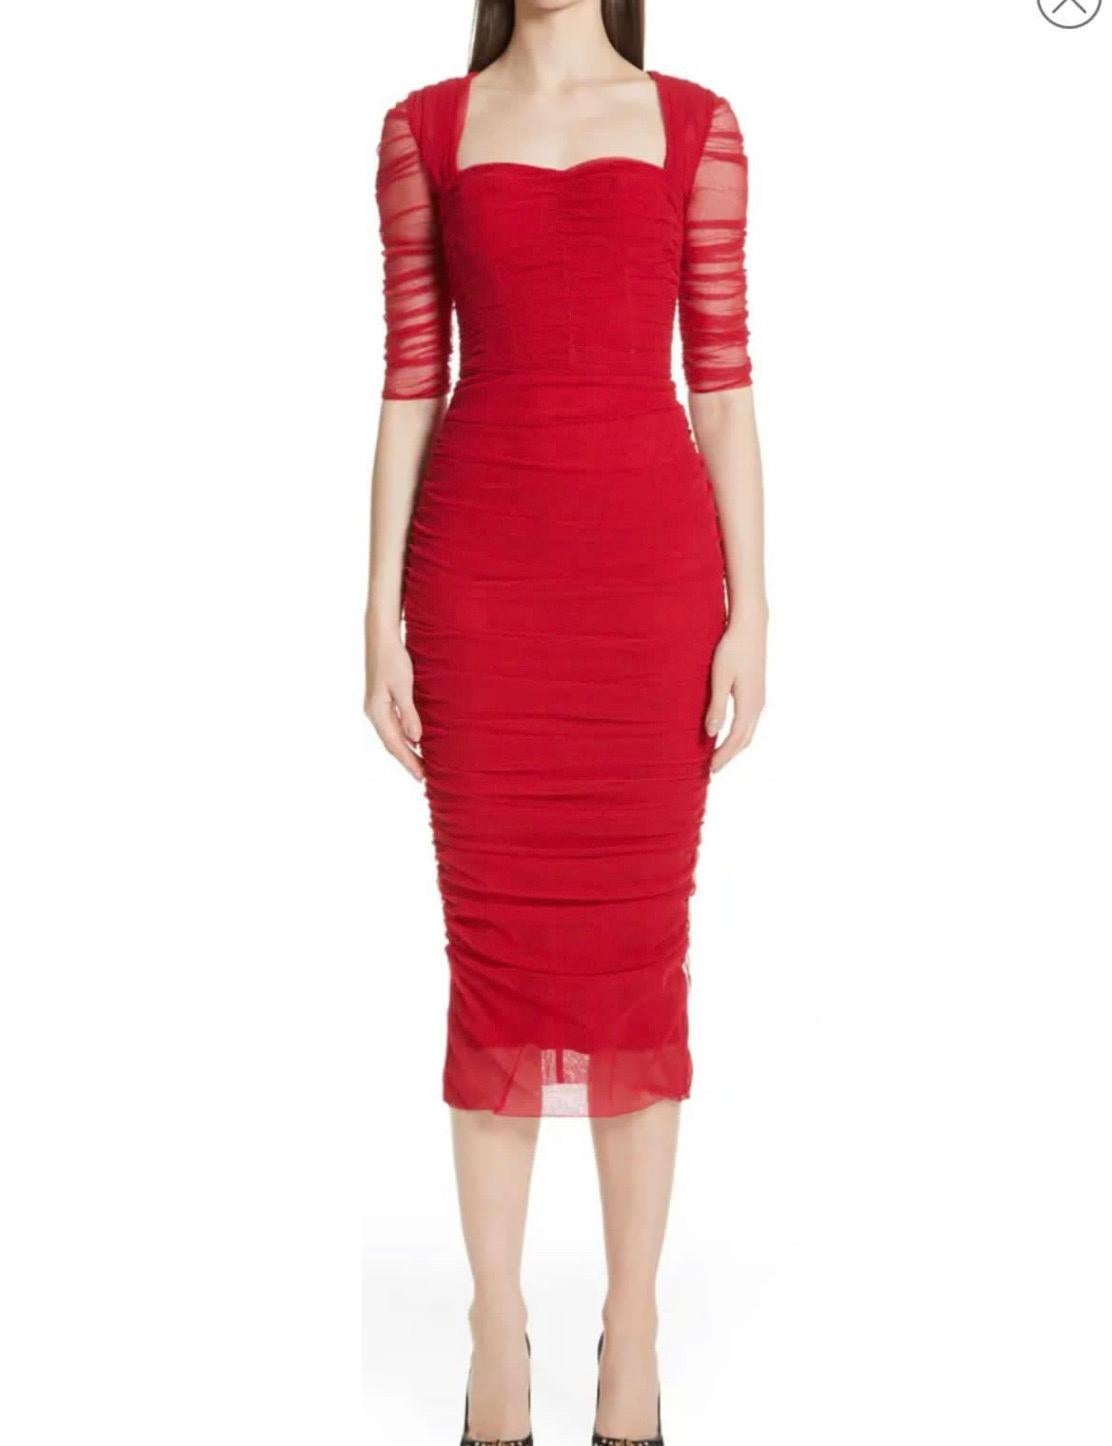 DOLCE & GABBANA

Gorgeous brand new with tags, 100% Authentic Dolce & Gabbana red two-layered dress with gathers. Fastened at the back with a zip. Lining trimmed with mesh. 3/4 length sleeves.

Model: 3/4 length sleeves Bodycon Sheath
Color: